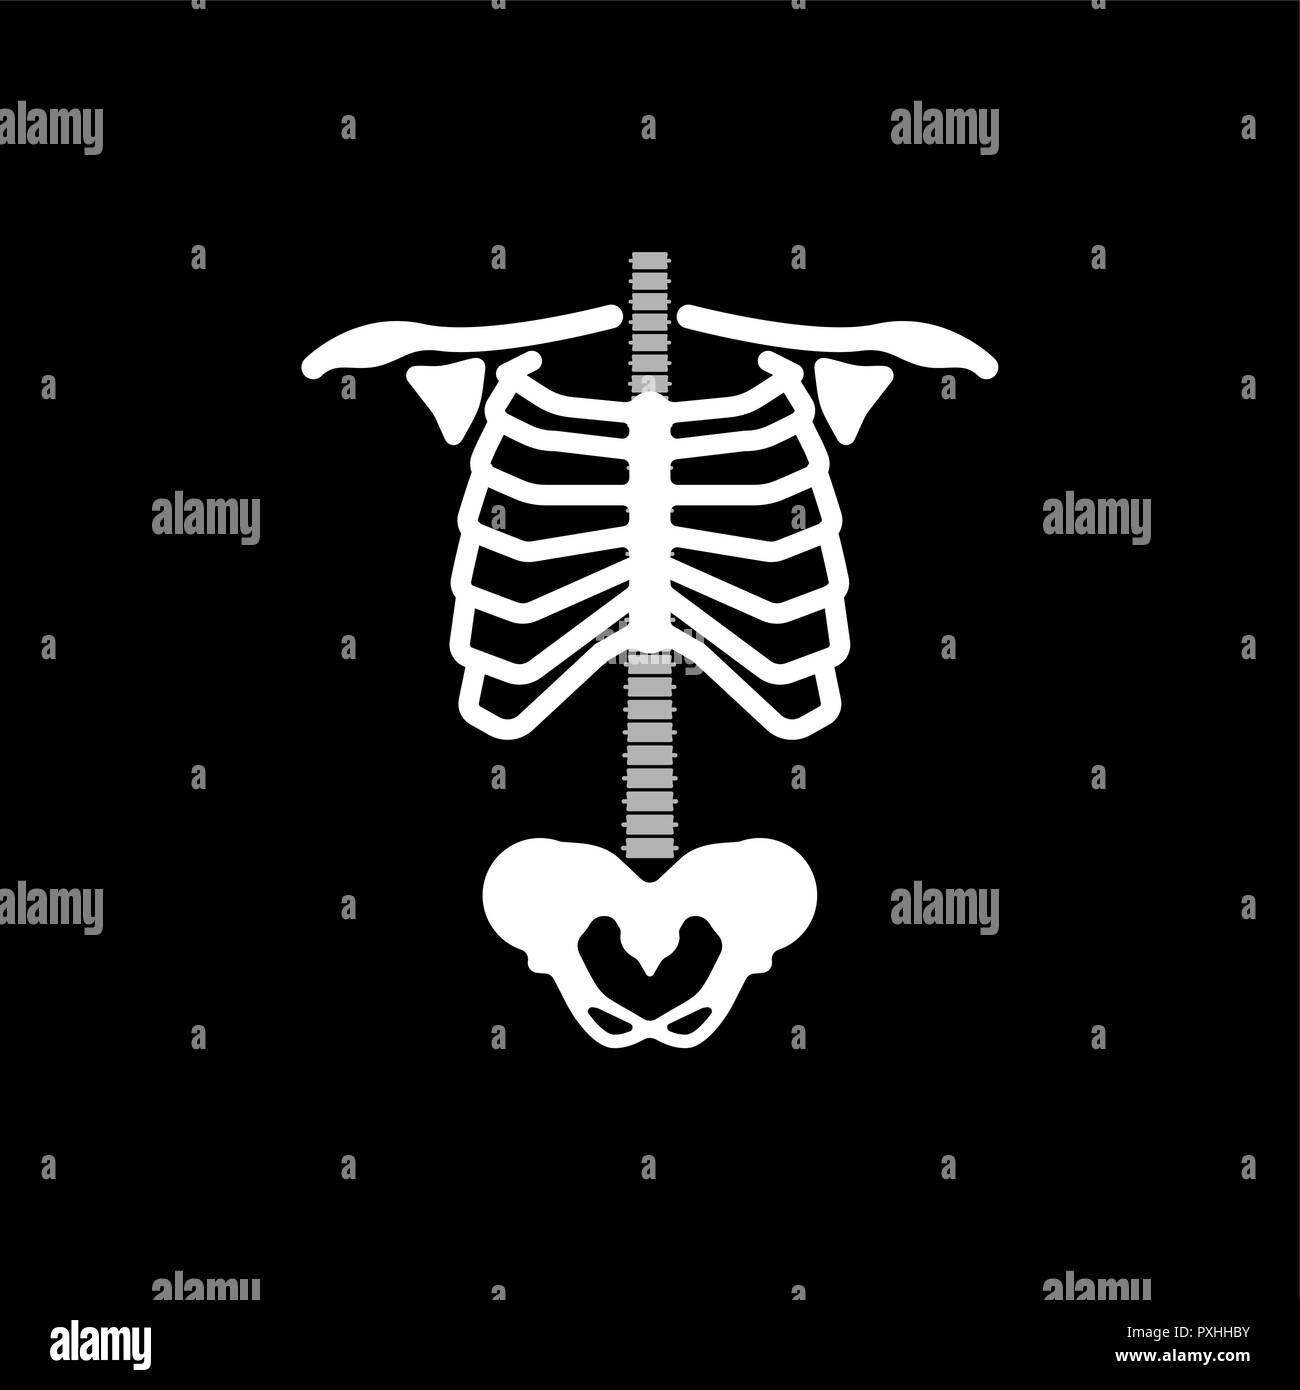 Rib cage. Ribs spine and hip bone. Skeleton anatomy human. Skeletal system cross section. vector illustration Stock Vector